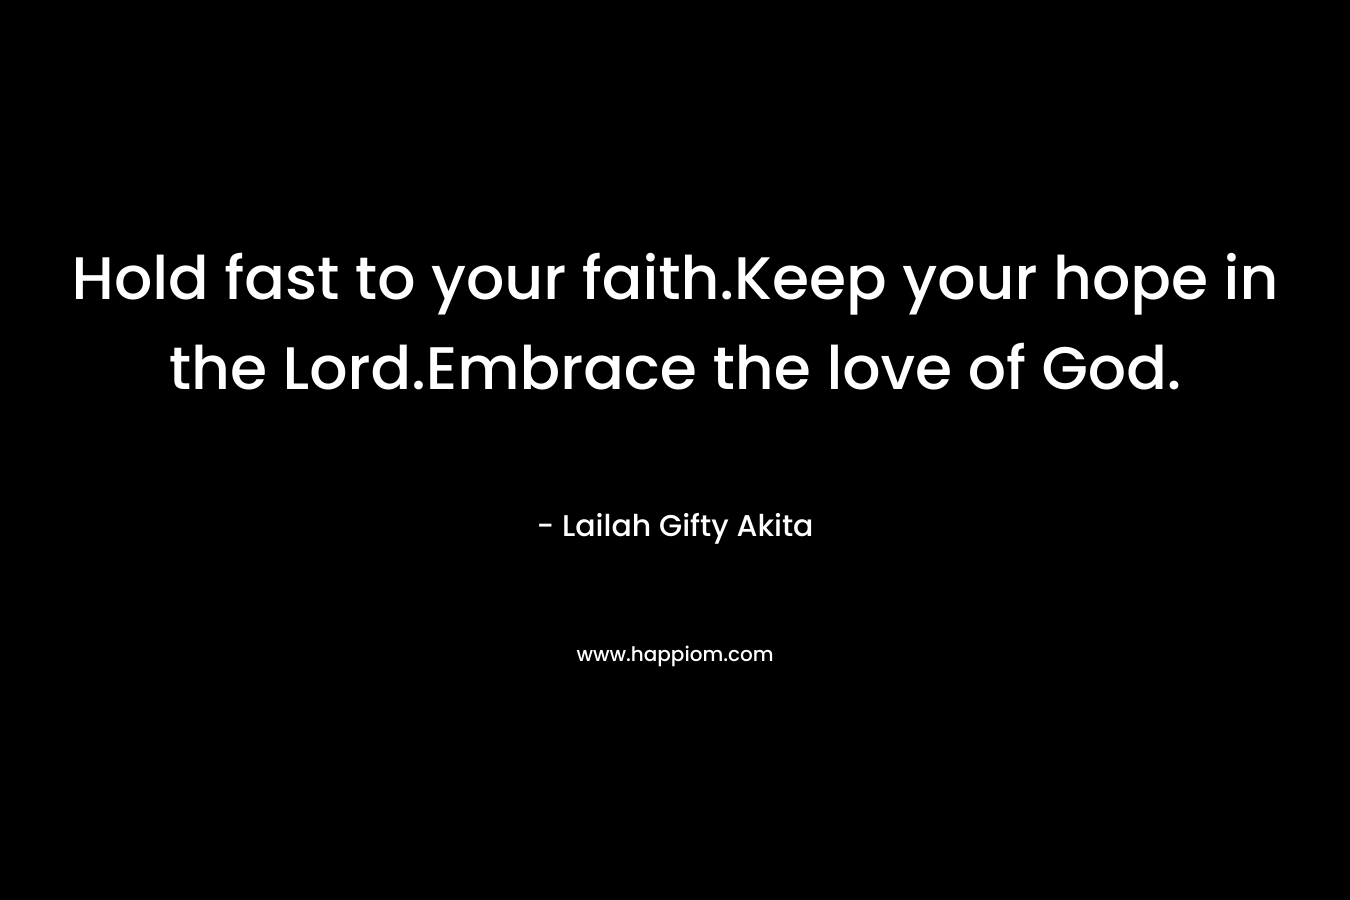 Hold fast to your faith.Keep your hope in the Lord.Embrace the love of God.